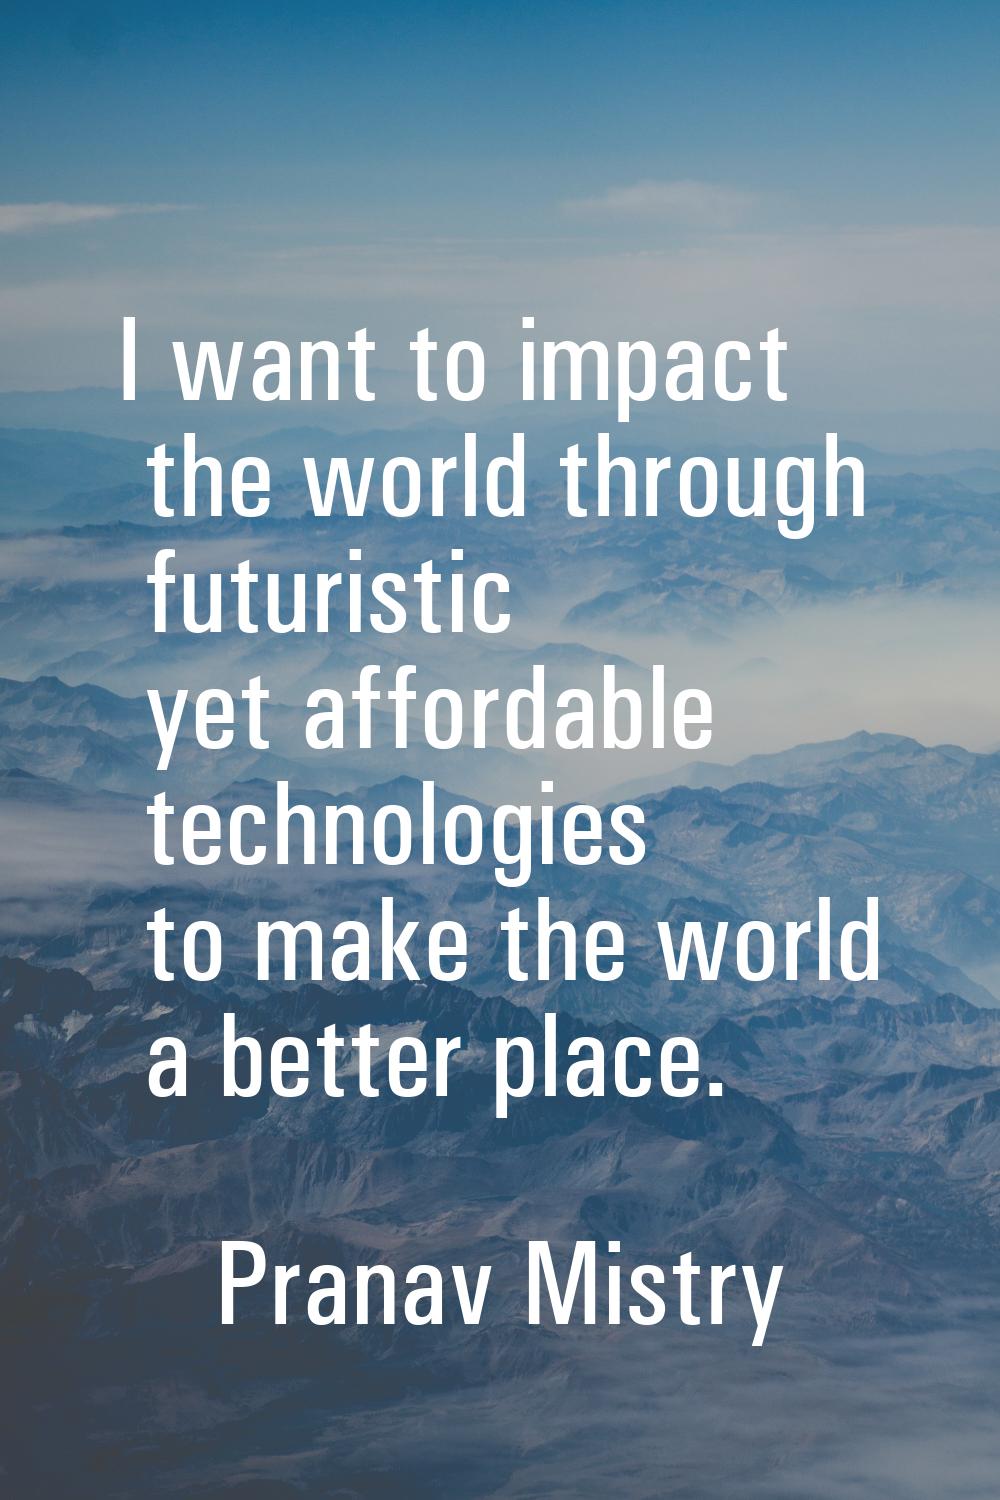 I want to impact the world through futuristic yet affordable technologies to make the world a bette